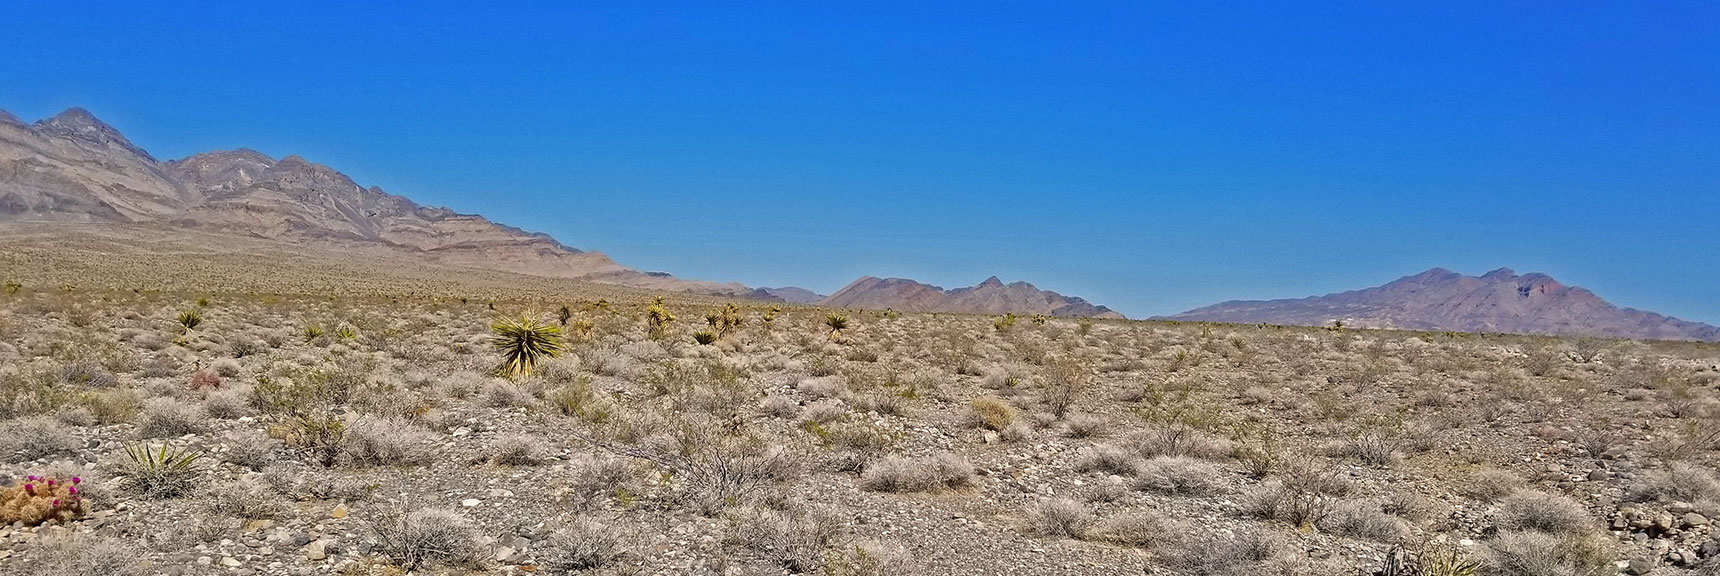 Gass Peak, Yucca Gap and Southern Sheep Range from Mormon Well Road | Fossil Ridge End to End | Sheep Range | Desert National Wildlife Refuge, Nevada